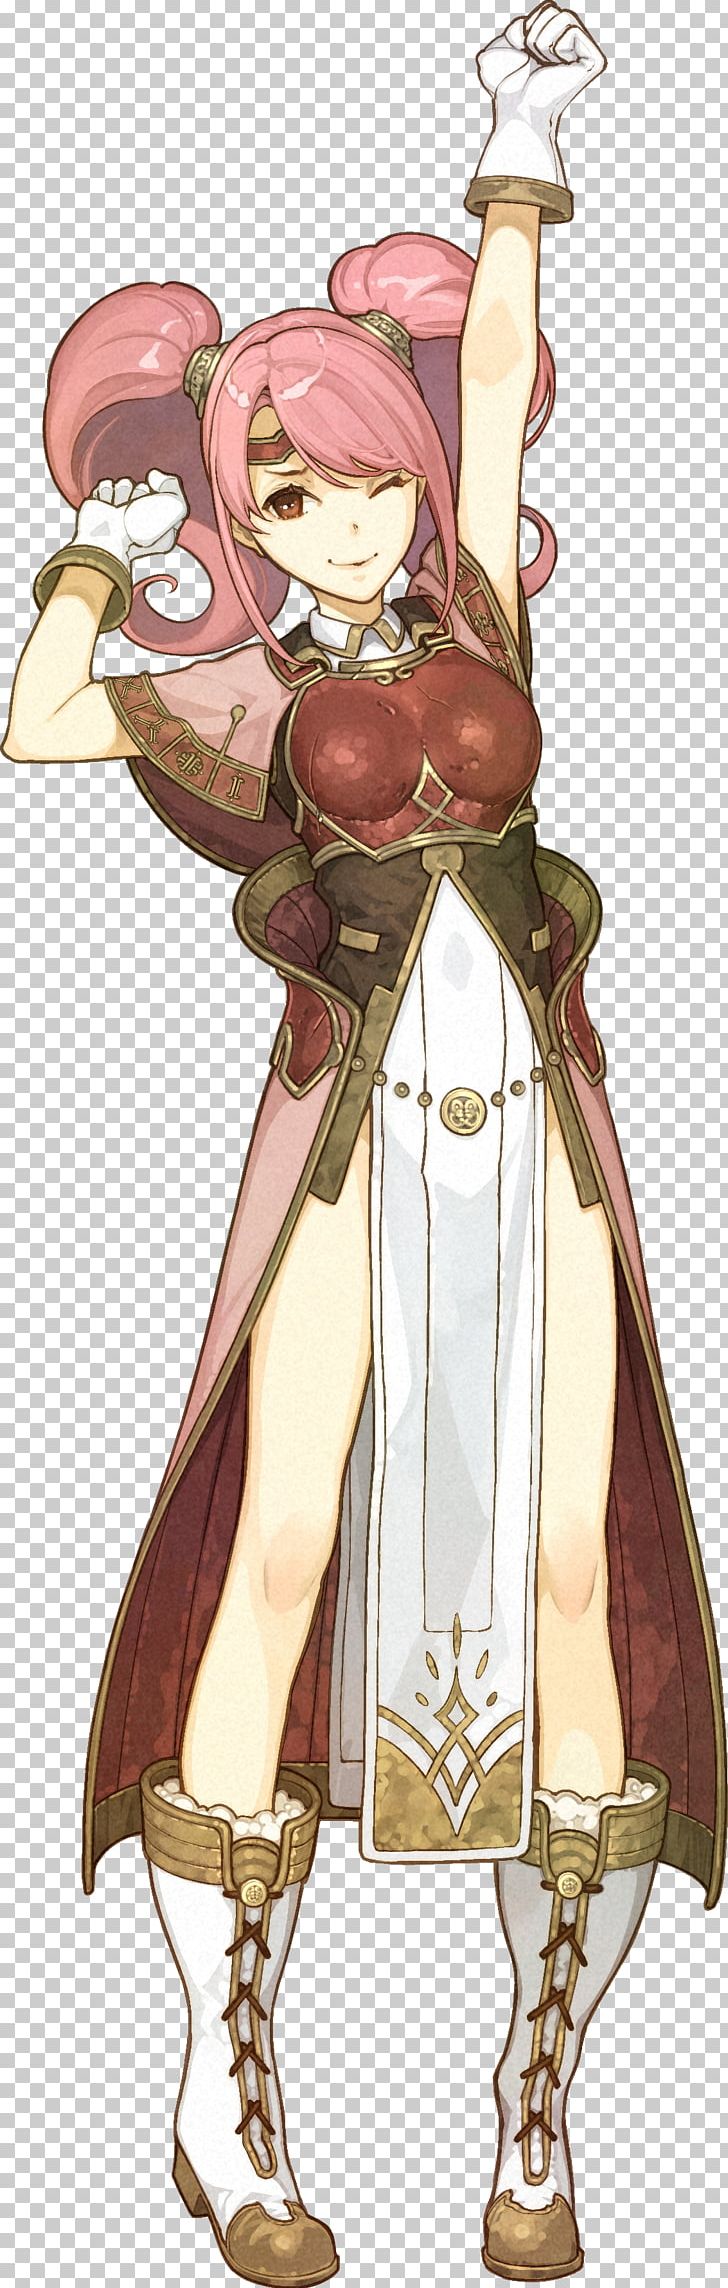 Fire Emblem Echoes: Shadows Of Valentia Fire Emblem Gaiden Fire Emblem Fates Fire Emblem Awakening PNG, Clipart, Character, Costume Design, Fictional Character, Figurine, Fire Emblem Free PNG Download